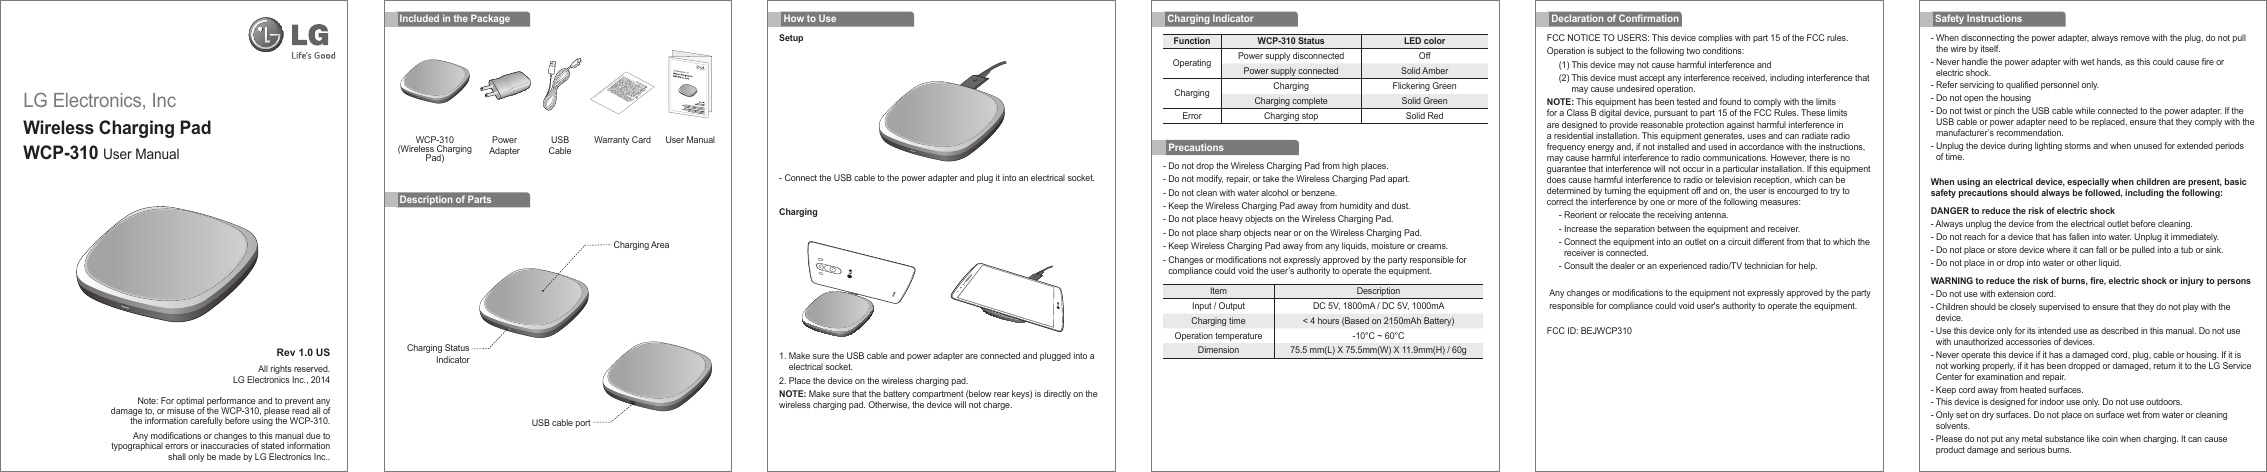 LG Electronics, IncWireless Charging PadWCP-310 User Manual Rev 1.0 USAll rights reserved.LG Electronics Inc., 2014Note: For optimal performance and to prevent any damage to, or misuse of the WCP-310, please read all of the information carefully before using the WCP-310.Any modications or changes to this manual due to typographical errors or inaccuracies of stated information shall only be made by LG Electronics Inc..- Do not drop the Wireless Charging Pad from high places.- Do not modify, repair, or take the Wireless Charging Pad apart.- Do not clean with water alcohol or benzene.- Keep the Wireless Charging Pad away from humidity and dust.- Do not place heavy objects on the Wireless Charging Pad.- Do not place sharp objects near or on the Wireless Charging Pad.- Keep Wireless Charging Pad away from any liquids, moisture or creams.-  Changes or modications not expressly approved by the party responsible for compliance could void the user’s authority to operate the equipment.Charging IndicatorIncluded in the PackageDescription of PartsFCC NOTICE TO USERS: This device complies with part 15 of the FCC rules.Operation is subject to the following two conditions:(1) This device may not cause harmful interference and(2)  This device must accept any interference received, including interference that may cause undesired operation.NOTE: This equipment has been tested and found to comply with the limits for a Class B digital device, pursuant to part 15 of the FCC Rules. These limits are designed to provide reasonable protection against harmful interference in a residential installation. This equipment generates, uses and can radiate radio frequency energy and, if not installed and used in accordance with the instructions, may cause harmful interference to radio communications. However, there is no guarantee that interference will not occur in a particular installation. If this equipment does cause harmful interference to radio or television reception, which can be determined by turning the equipment off and on, the user is encourged to try to correct the interference by one or more of the following measures:- Reorient or relocate the receiving antenna.- Increase the separation between the equipment and receiver.-  Connect the equipment into an outlet on a circuit different from that to which the receiver is connected.- Consult the dealer or an experienced radio/TV technician for help. Any changes or modifications to the equipment not expressly approved by the party responsible for compliance could void user&apos;s authority to operate the equipment. FCC ID: BEJWCP310-  When disconnecting the power adapter, always remove with the plug, do not pull the wire by itself.-  Never handle the power adapter with wet hands, as this could cause fire or electric shock.- Refer servicing to qualified personnel only.- Do not open the housing-  Do not twist or pinch the USB cable while connected to the power adapter. If the USB cable or power adapter need to be replaced, ensure that they comply with the manufacturer’s recommendation.-  Unplug the device during lighting storms and when unused for extended periods of time.When using an electrical device, especially when children are present, basic safety precautions should always be followed, including the following:DANGER to reduce the risk of electric shock- Always unplug the device from the electrical outlet before cleaning.- Do not reach for a device that has fallen into water. Unplug it immediately.- Do not place or store device where it can fall or be pulled into a tub or sink.- Do not place in or drop into water or other liquid.WARNING to reduce the risk of burns, re, electric shock or injury to persons-  Do not use with extension cord.-  Children should be closely supervised to ensure that they do not play with the device.-  Use this device only for its intended use as described in this manual. Do not use with unauthorized accessories of devices.-  Never operate this device if it has a damaged cord, plug, cable or housing. If it is not working properly, if it has been dropped or damaged, return it to the LG Service Center for examination and repair.- Keep cord away from heated surfaces.- This device is designed for indoor use only. Do not use outdoors.-  Only set on dry surfaces. Do not place on surface wet from water or cleaning solvents. -  Please do not put any metal substance like coin when charging. It can cause product damage and serious burns.Declaration of Conrmation Safety InstructionsHow to UseSetupChargingItem DescriptionInput / Output DC 5V, 1800mA / DC 5V, 1000mACharging time &lt; 4 hours (Based on 2150mAh Battery)Operation temperature -10°C ~ 60°CDimension 75.5 mm(L) X 75.5mm(W) X 11.9mm(H) / 60gFunction WCP-310 Status LED colorOperating Power supply disconnected OffPower supply connected Solid AmberCharging Charging Flickering GreenCharging complete Solid GreenError Charging stop Solid RedPrecautions1.  Make sure the USB cable and power adapter are connected and plugged into a electrical socket.2. Place the device on the wireless charging pad.NOTE: Make sure that the battery compartment (below rear keys) is directly on the wireless charging pad. Otherwise, the device will not charge.-  Connect the USB cable to the power adapter and plug it into an electrical socket.Charging AreaCharging StatusIndicatorUSB cable portWCP-310 (Wireless Charging Pad)Warranty CardPowerAdapterUSBCableUser Manual